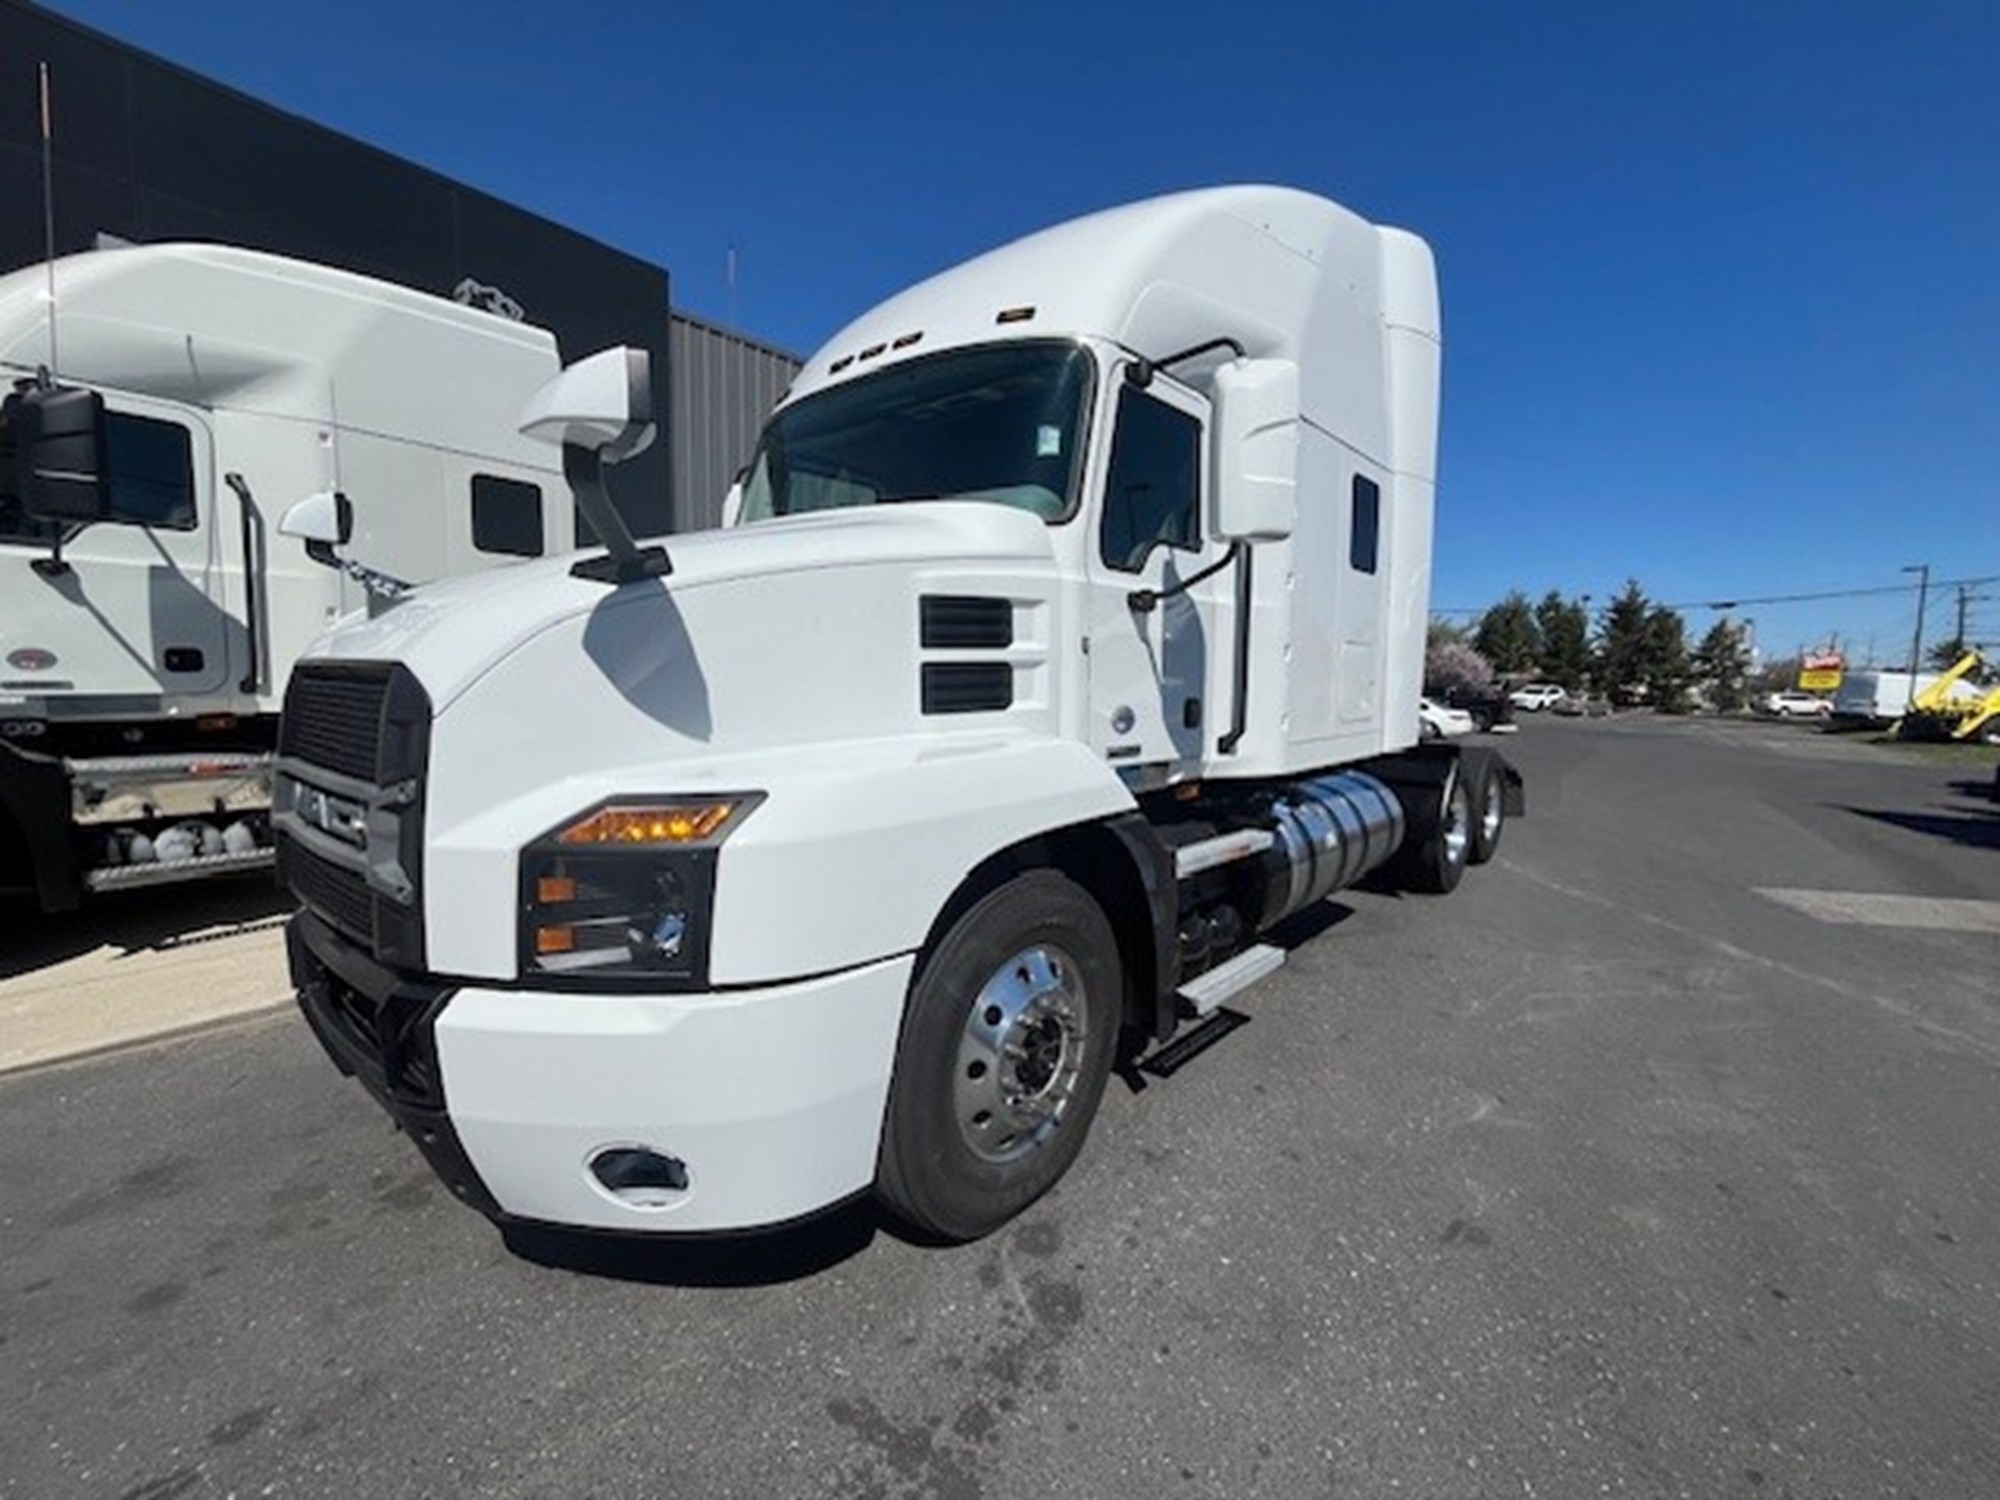 Used Truck Inventory - 1001662 01 - 71